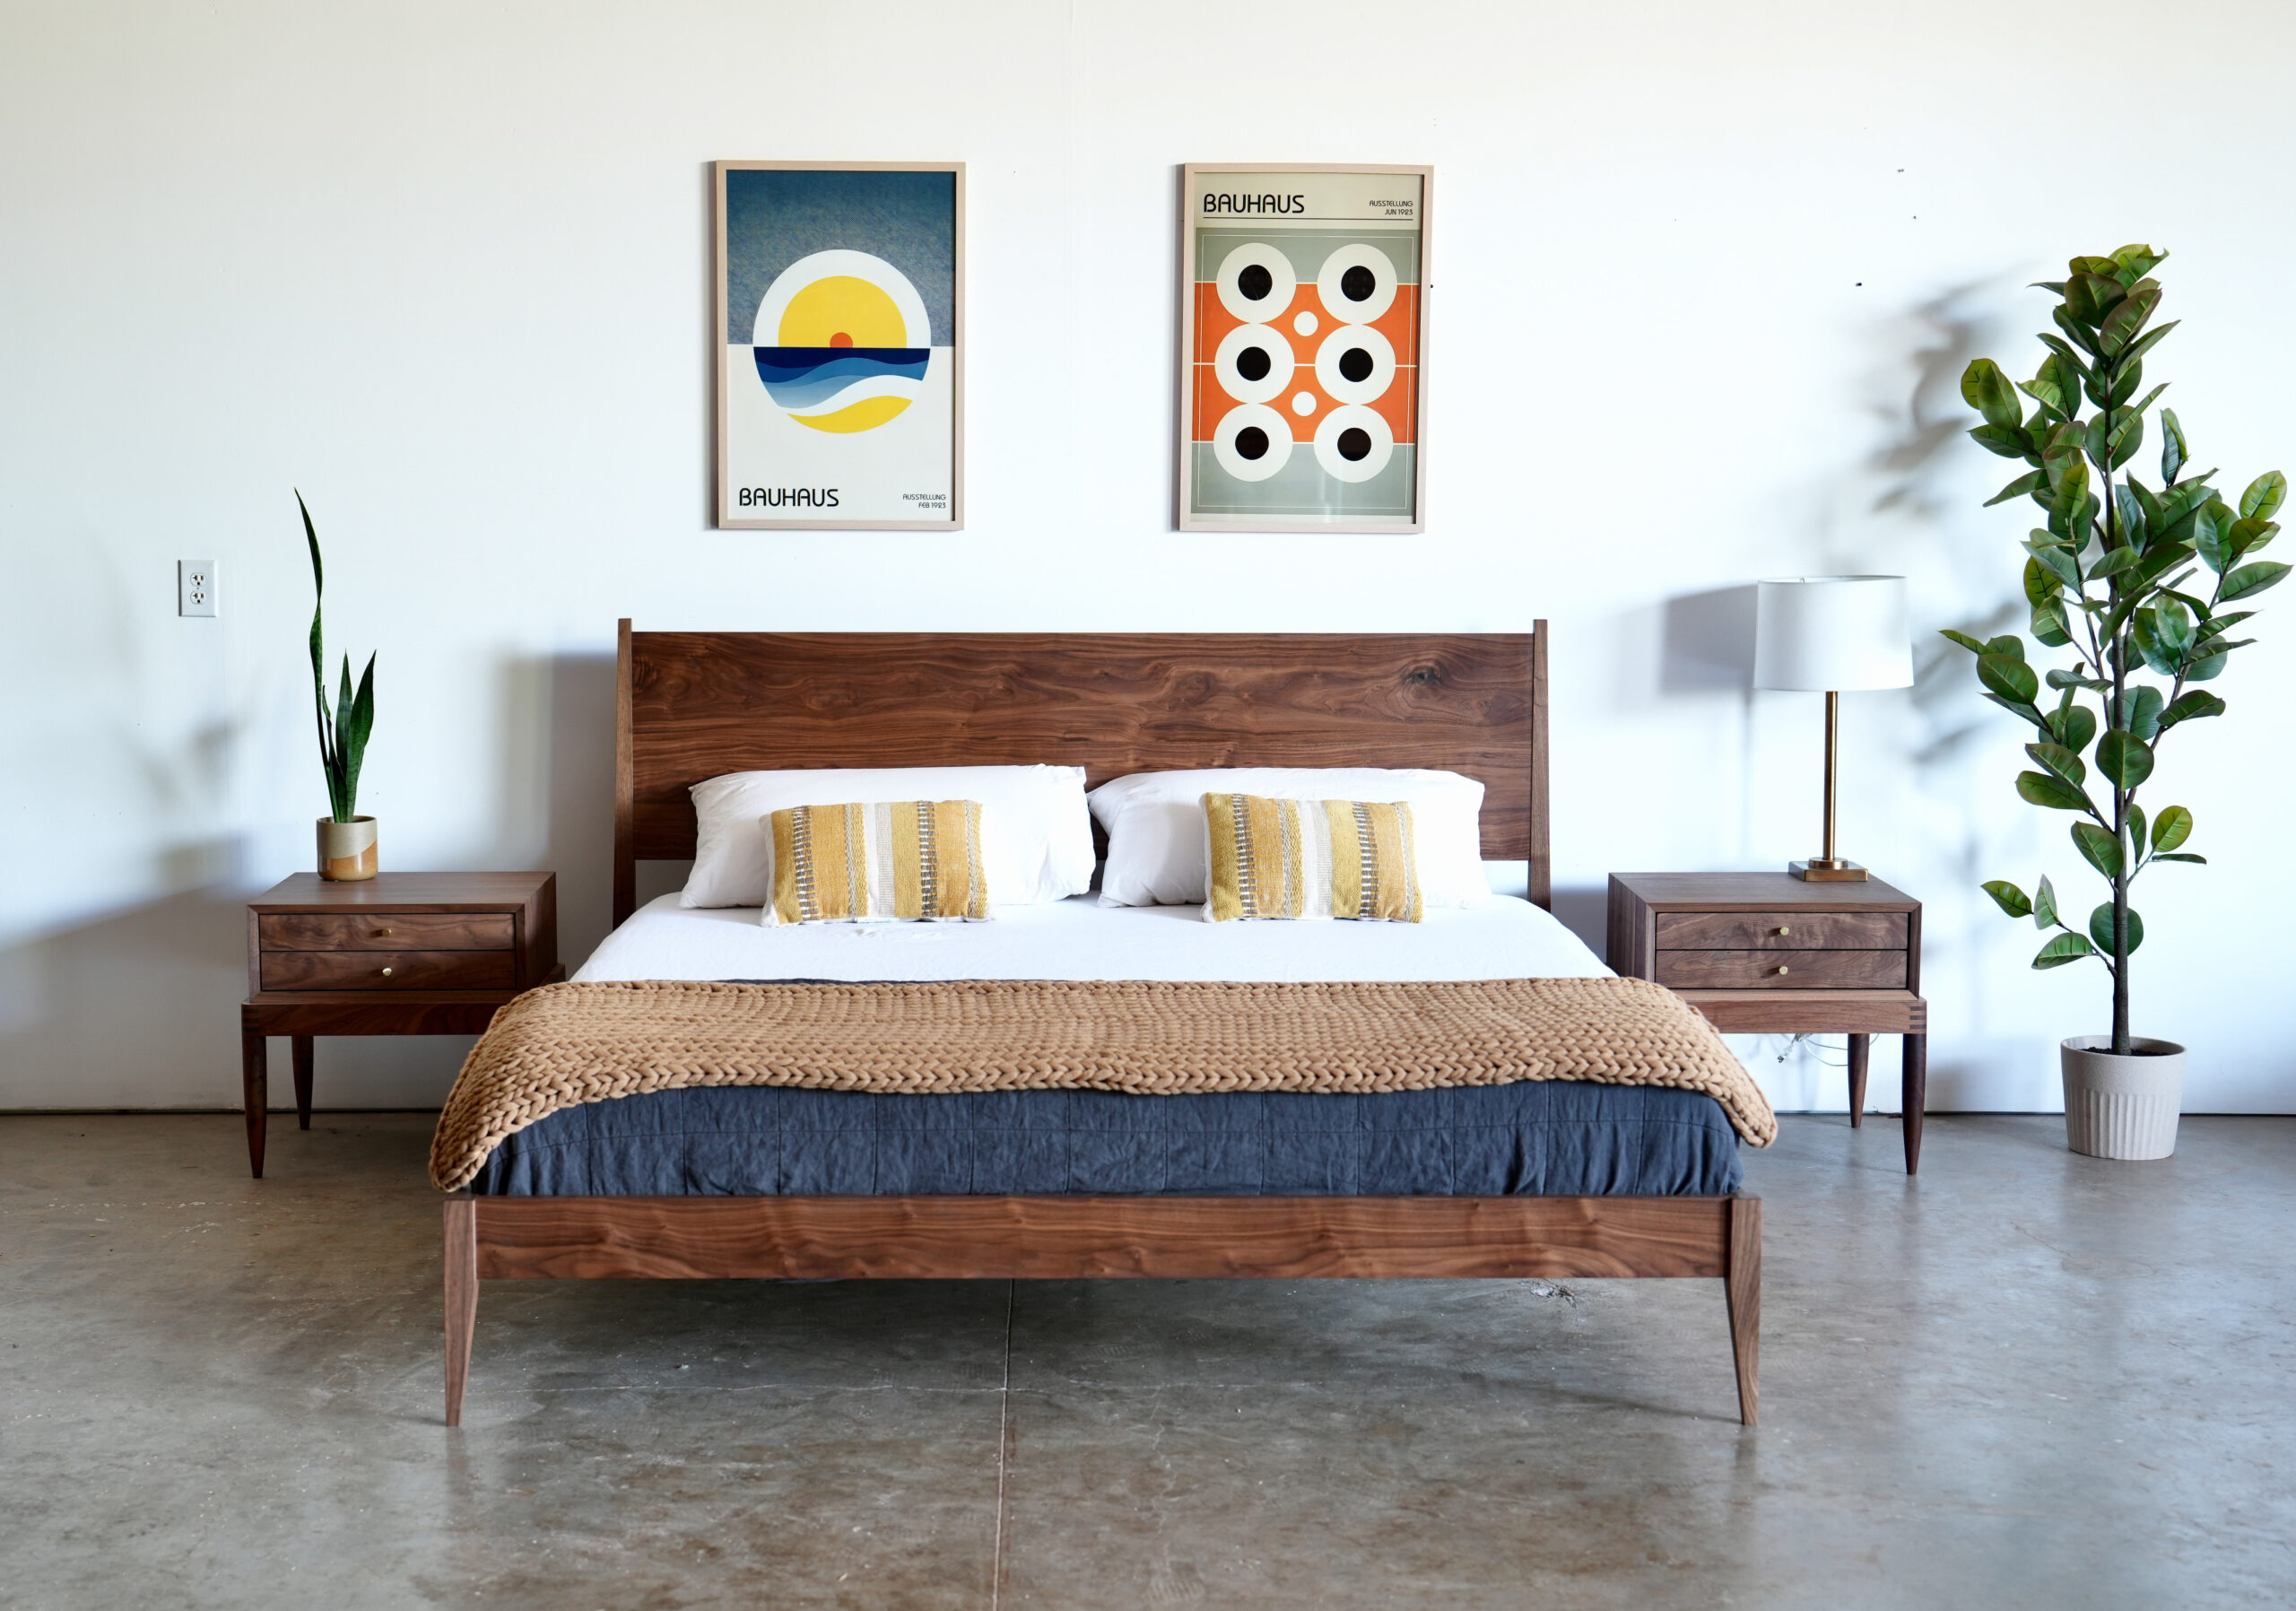 A walnut shaker style midcentury modern bed with tapered legs. A mattress, pillows, and a throw blankets are on the bed. There is a matching set of side tables next to the bed..